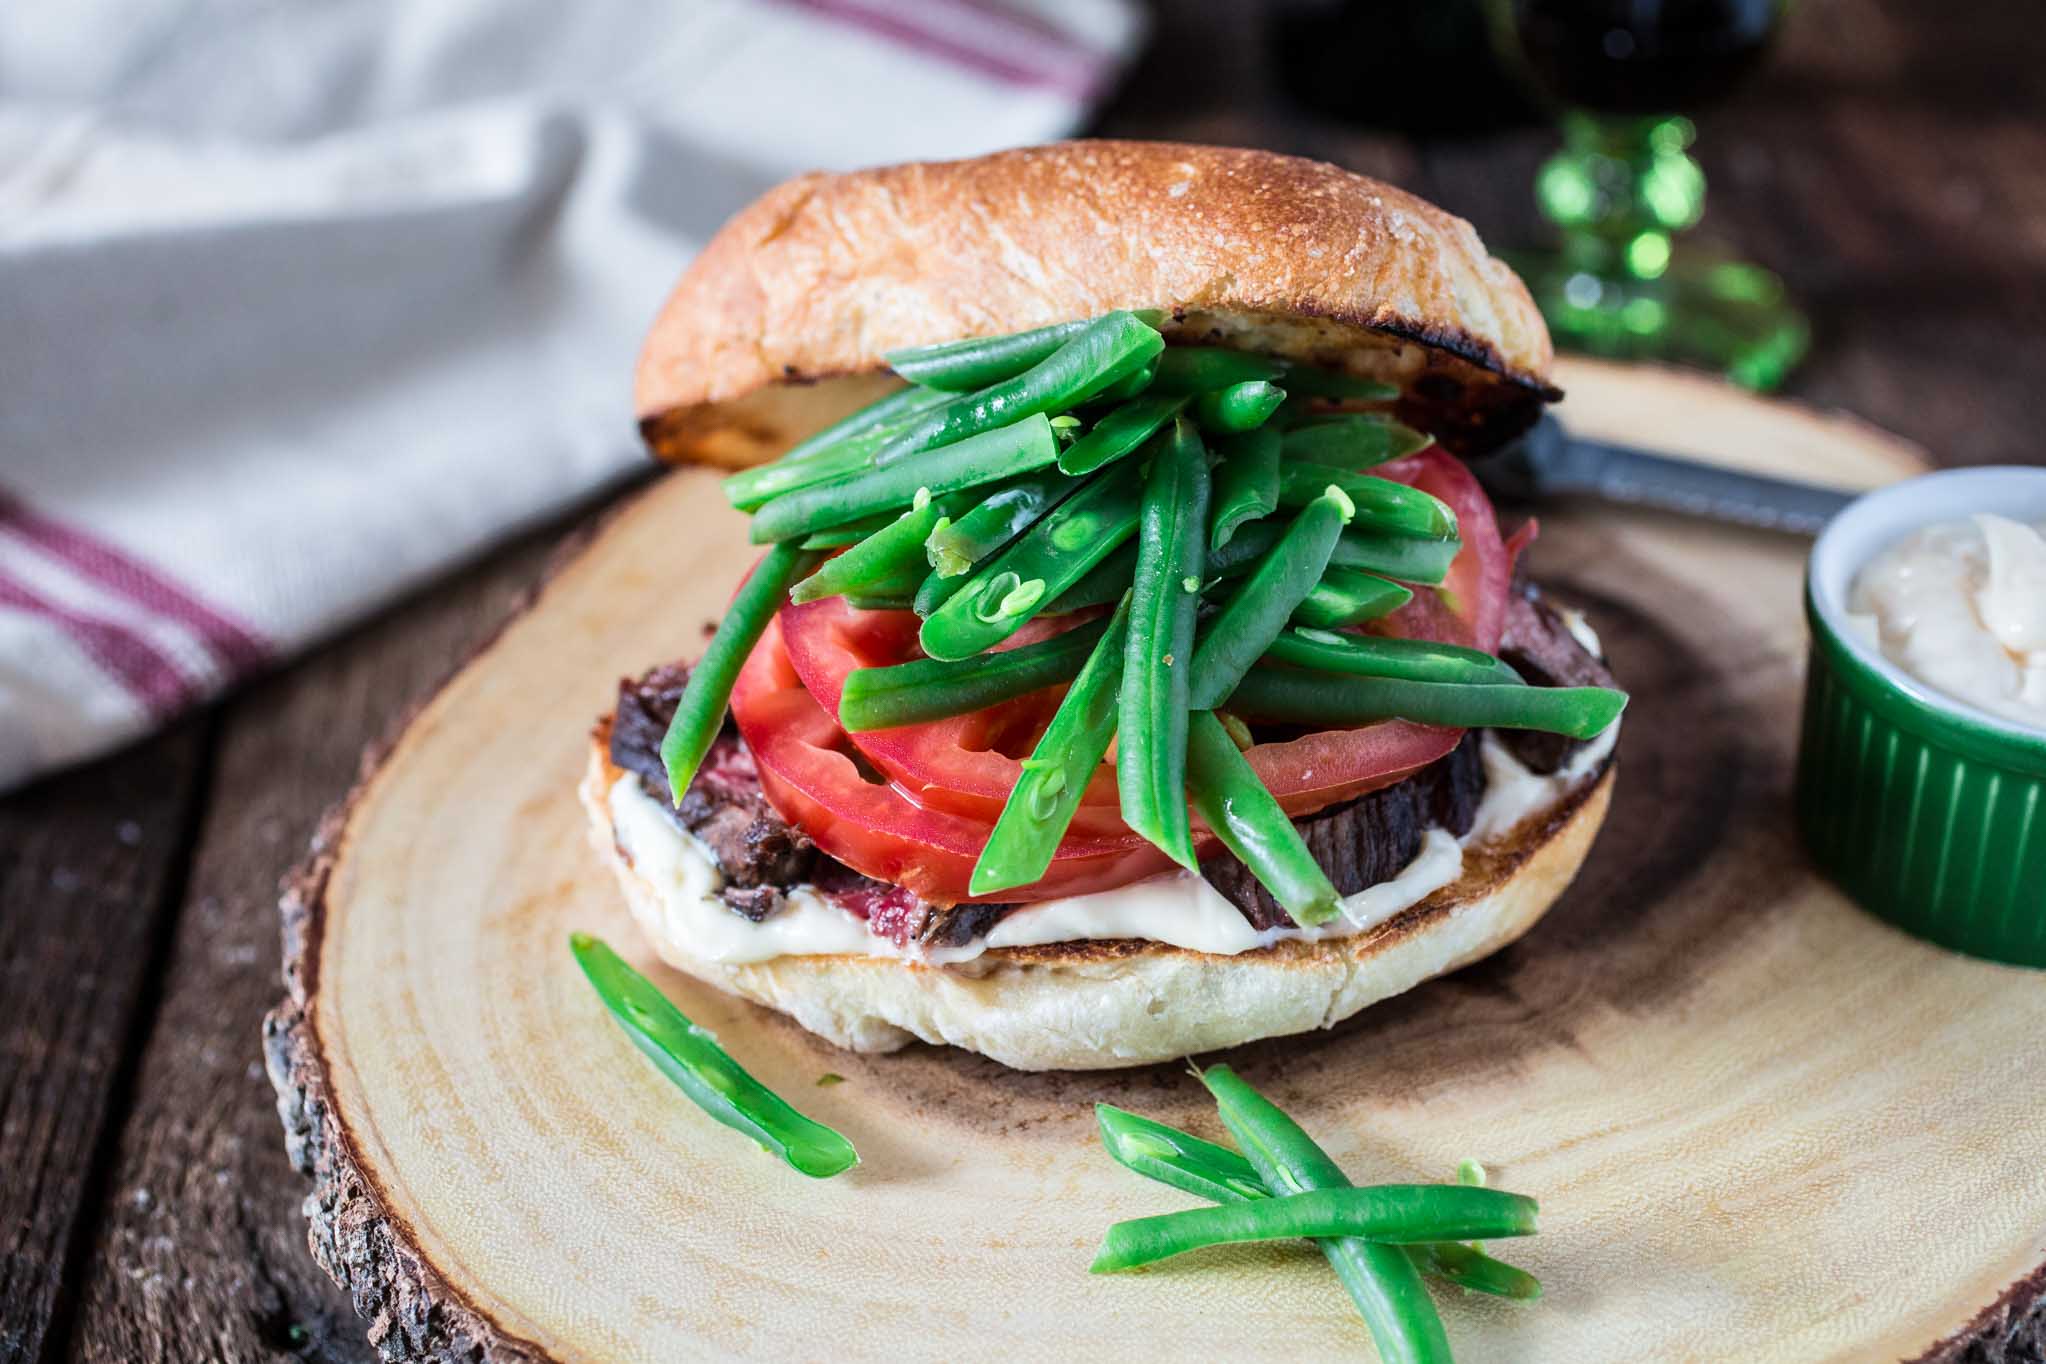 Chacarero (Chilean Steak Sandwich) | www.oliviascuisine.com | This is Chile's national sandwich. It consists of a roll piled high with grilled meat, tomatoes, a dollop of mayo, hot sauce and green beans! (Food styling and photography by Olivia Mesquita.)